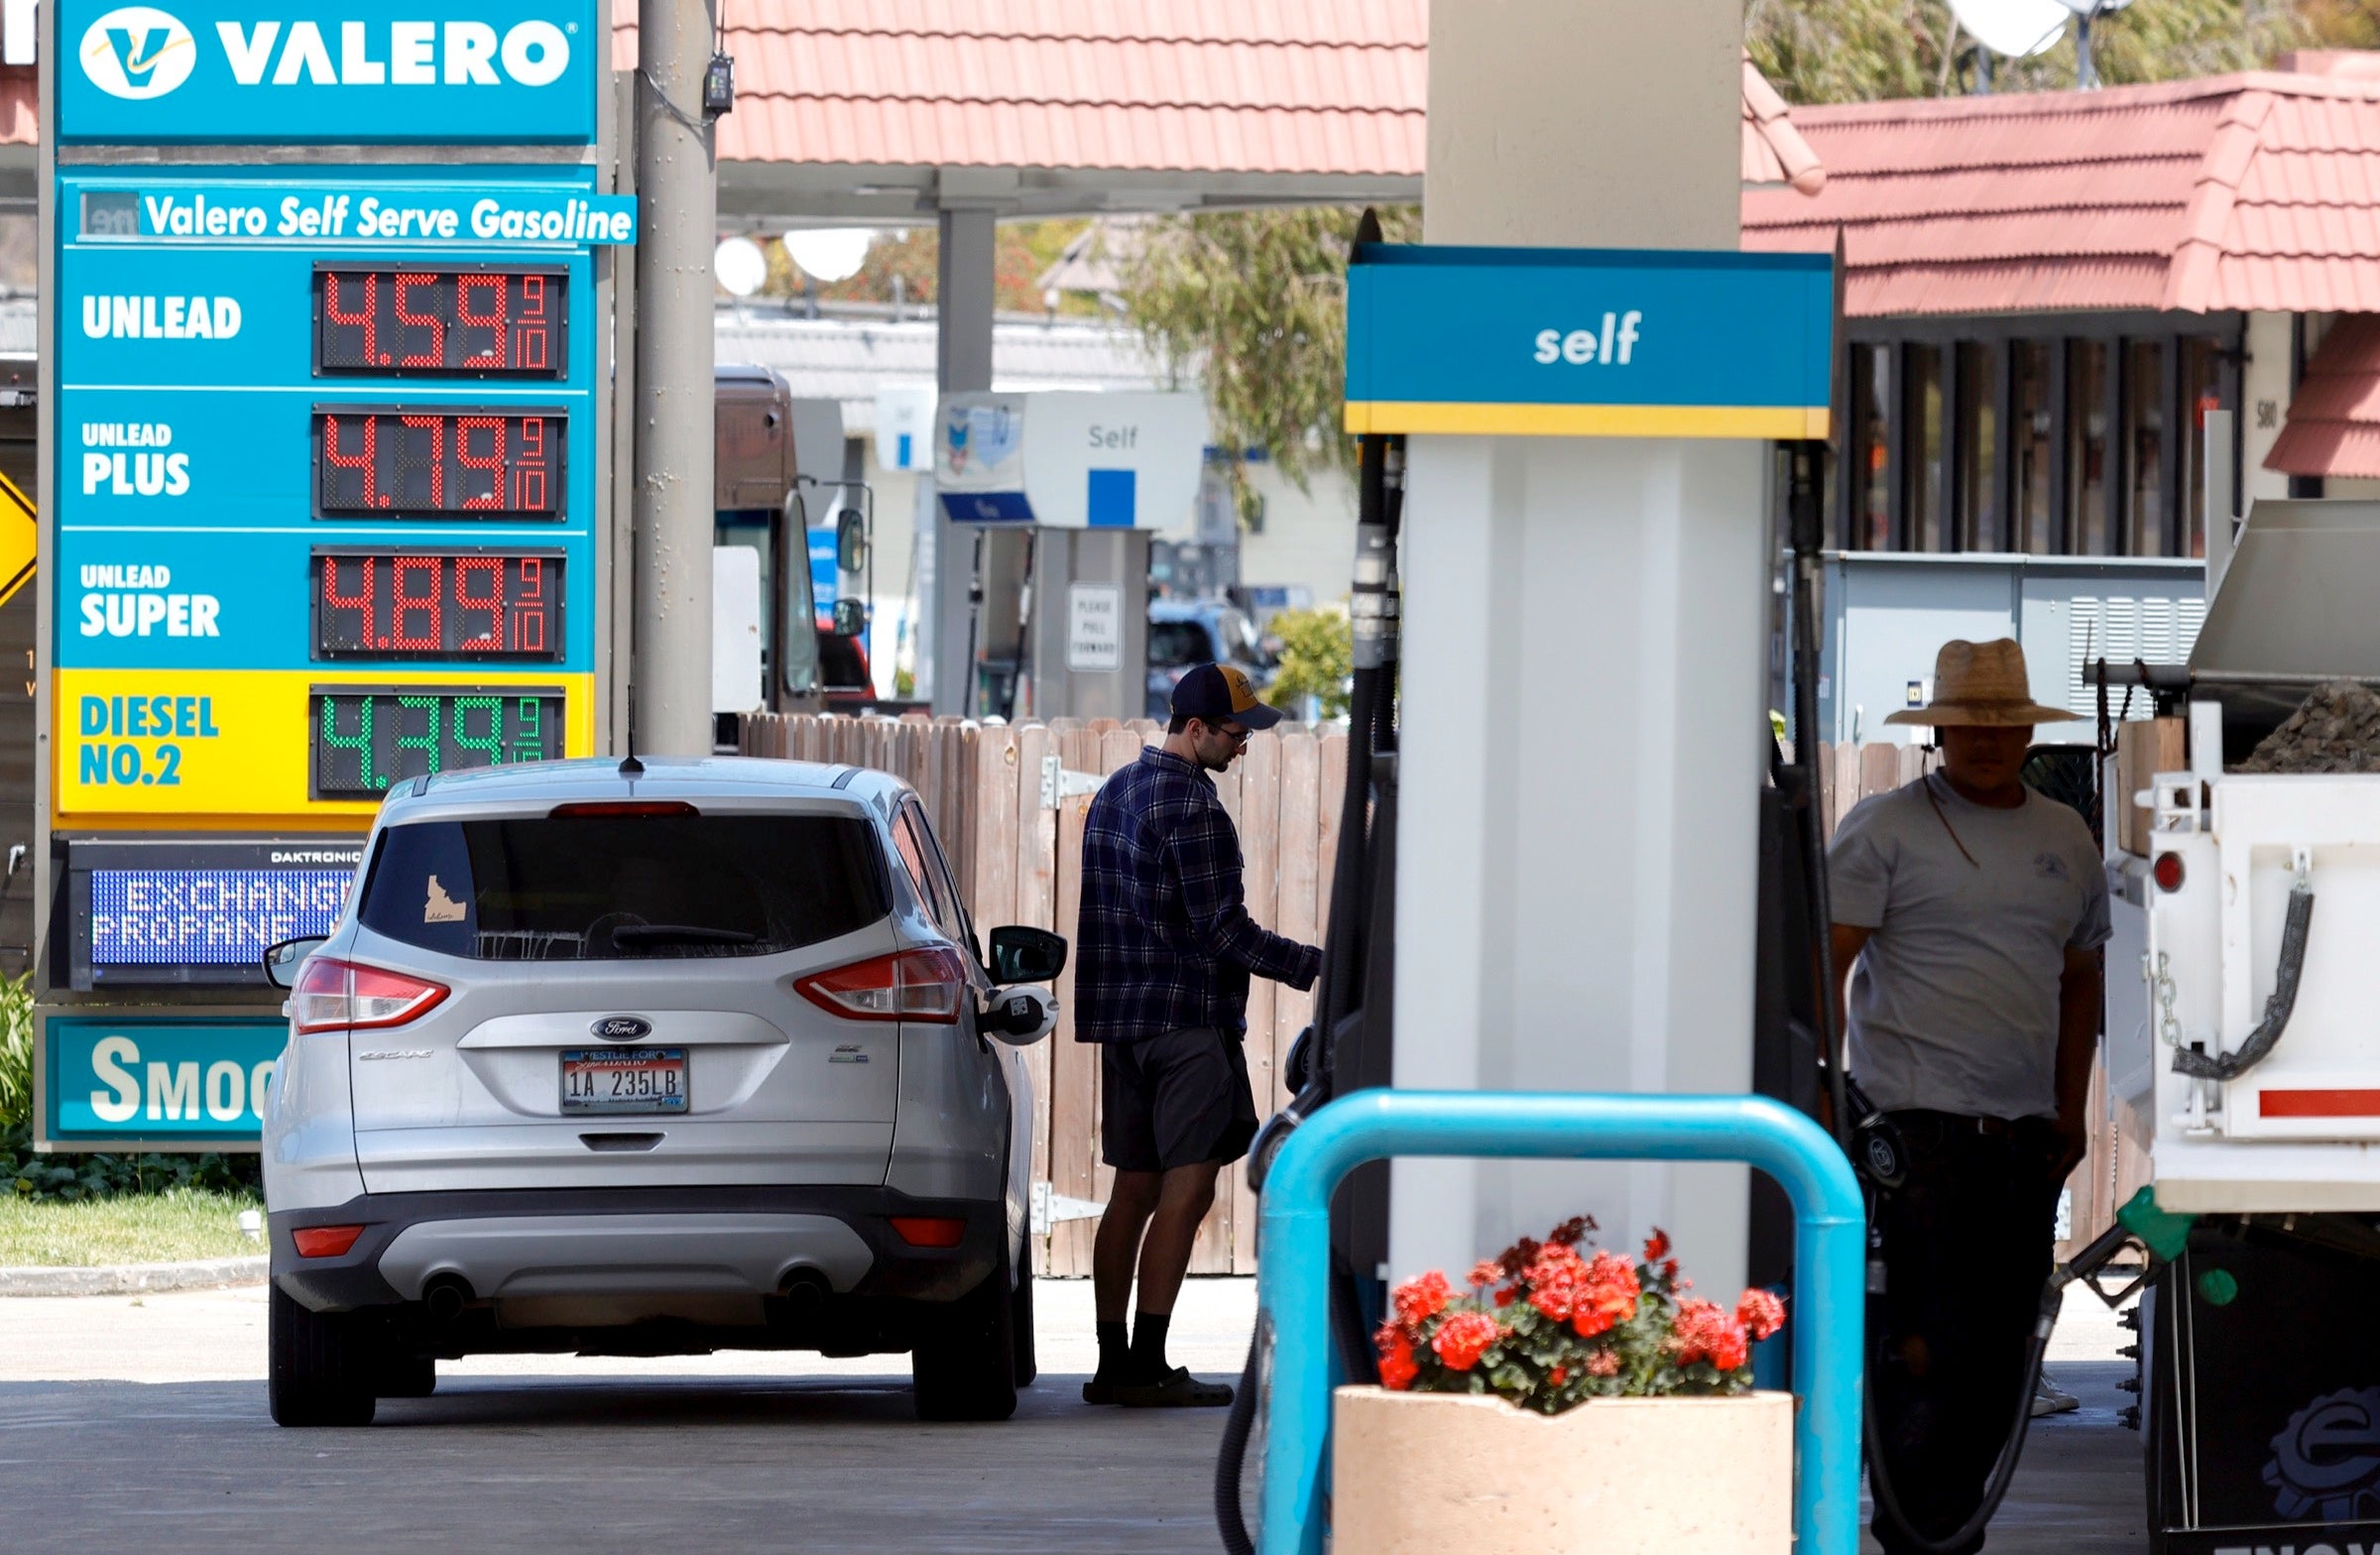 Drivers pumping gas at a Valero gas station in California